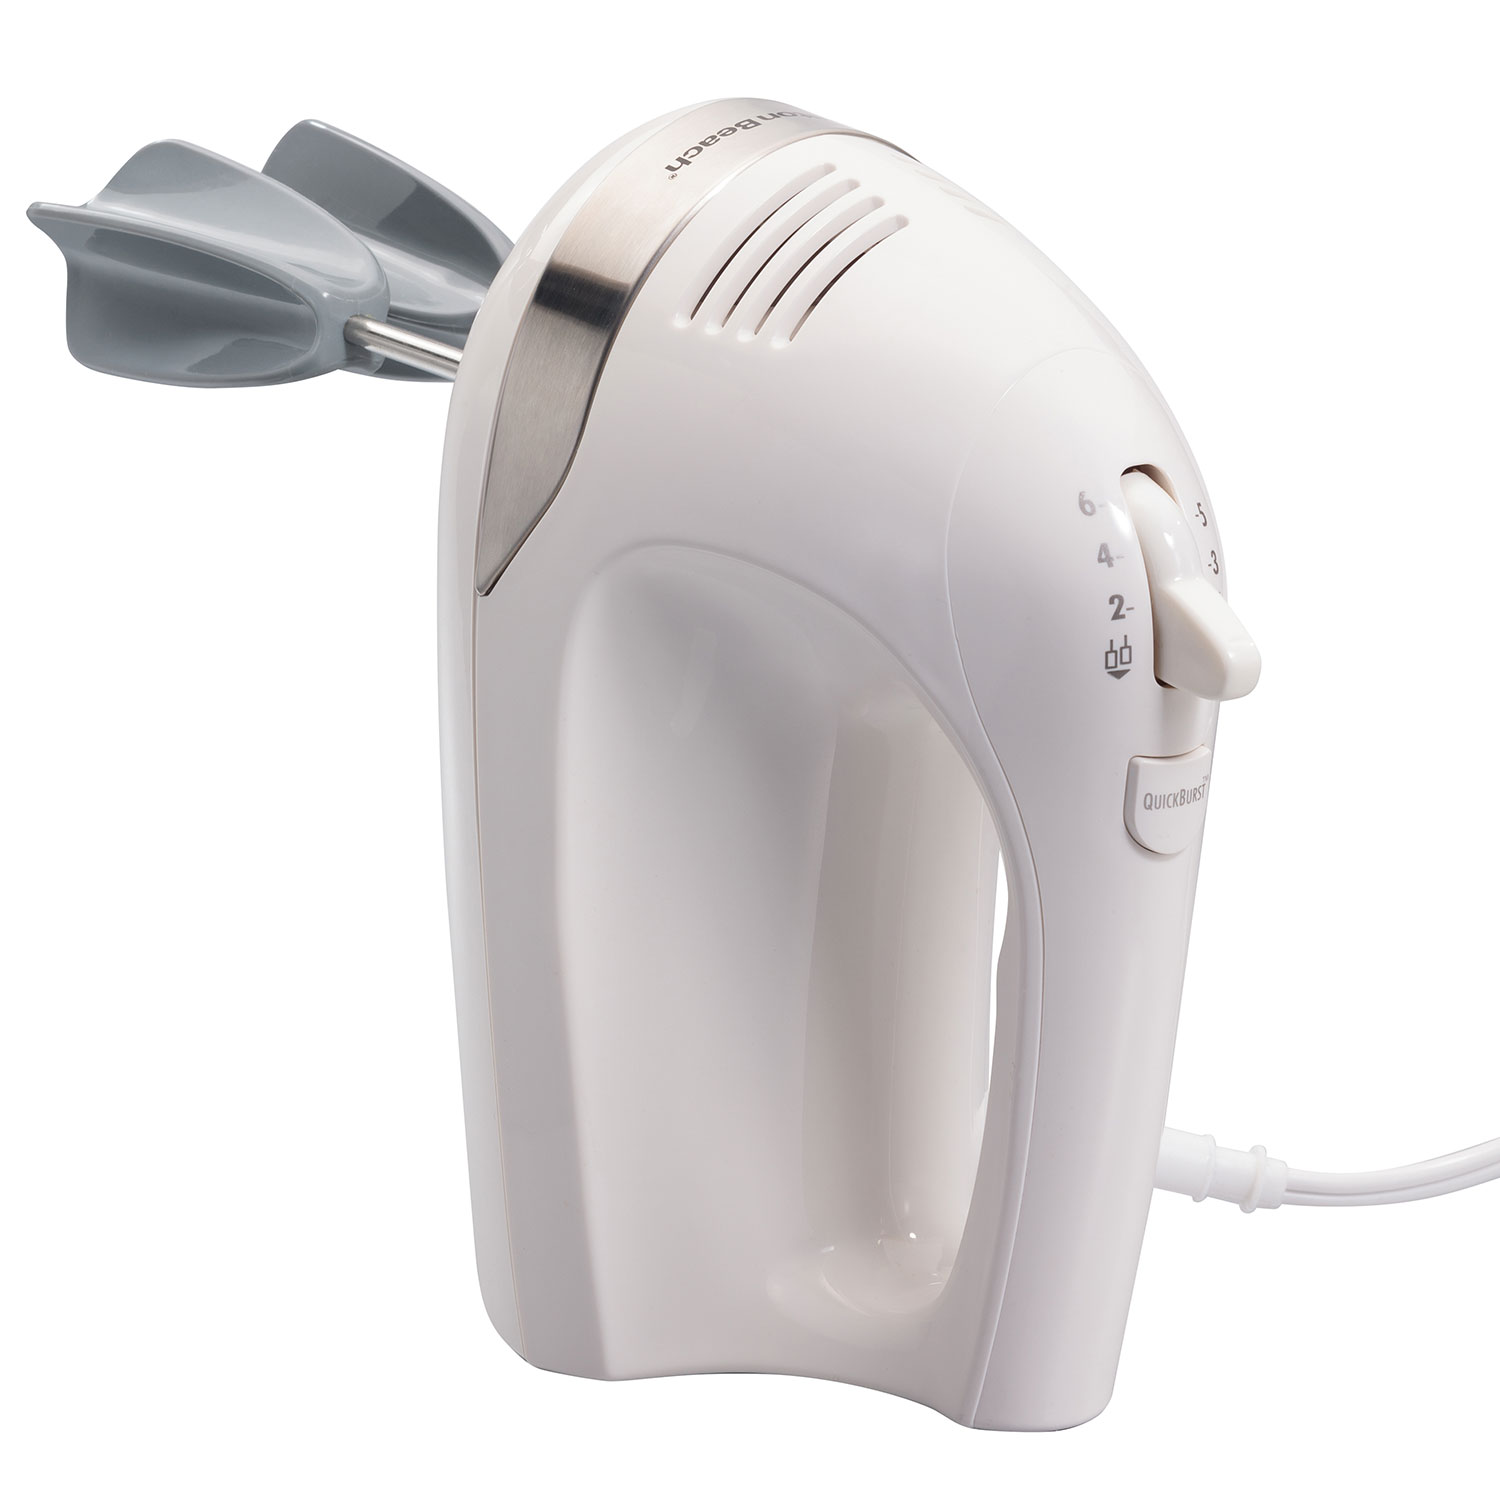 6 Speed Hand Mixer with Snap-On Case White (62636)